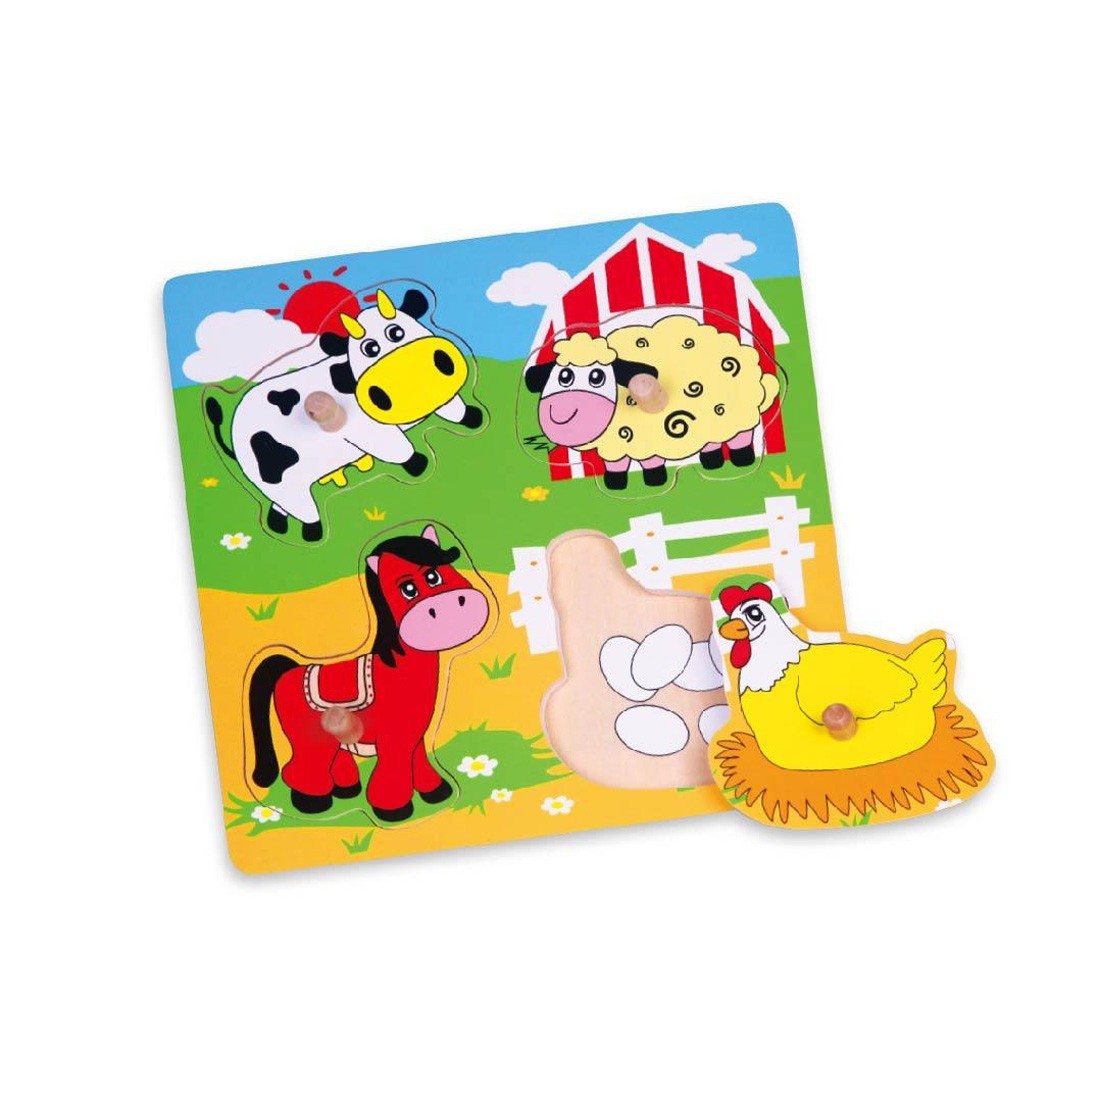 Buy Wooden Flat Puzzle - Farm Animals - Viga Toys, delivered to your ...